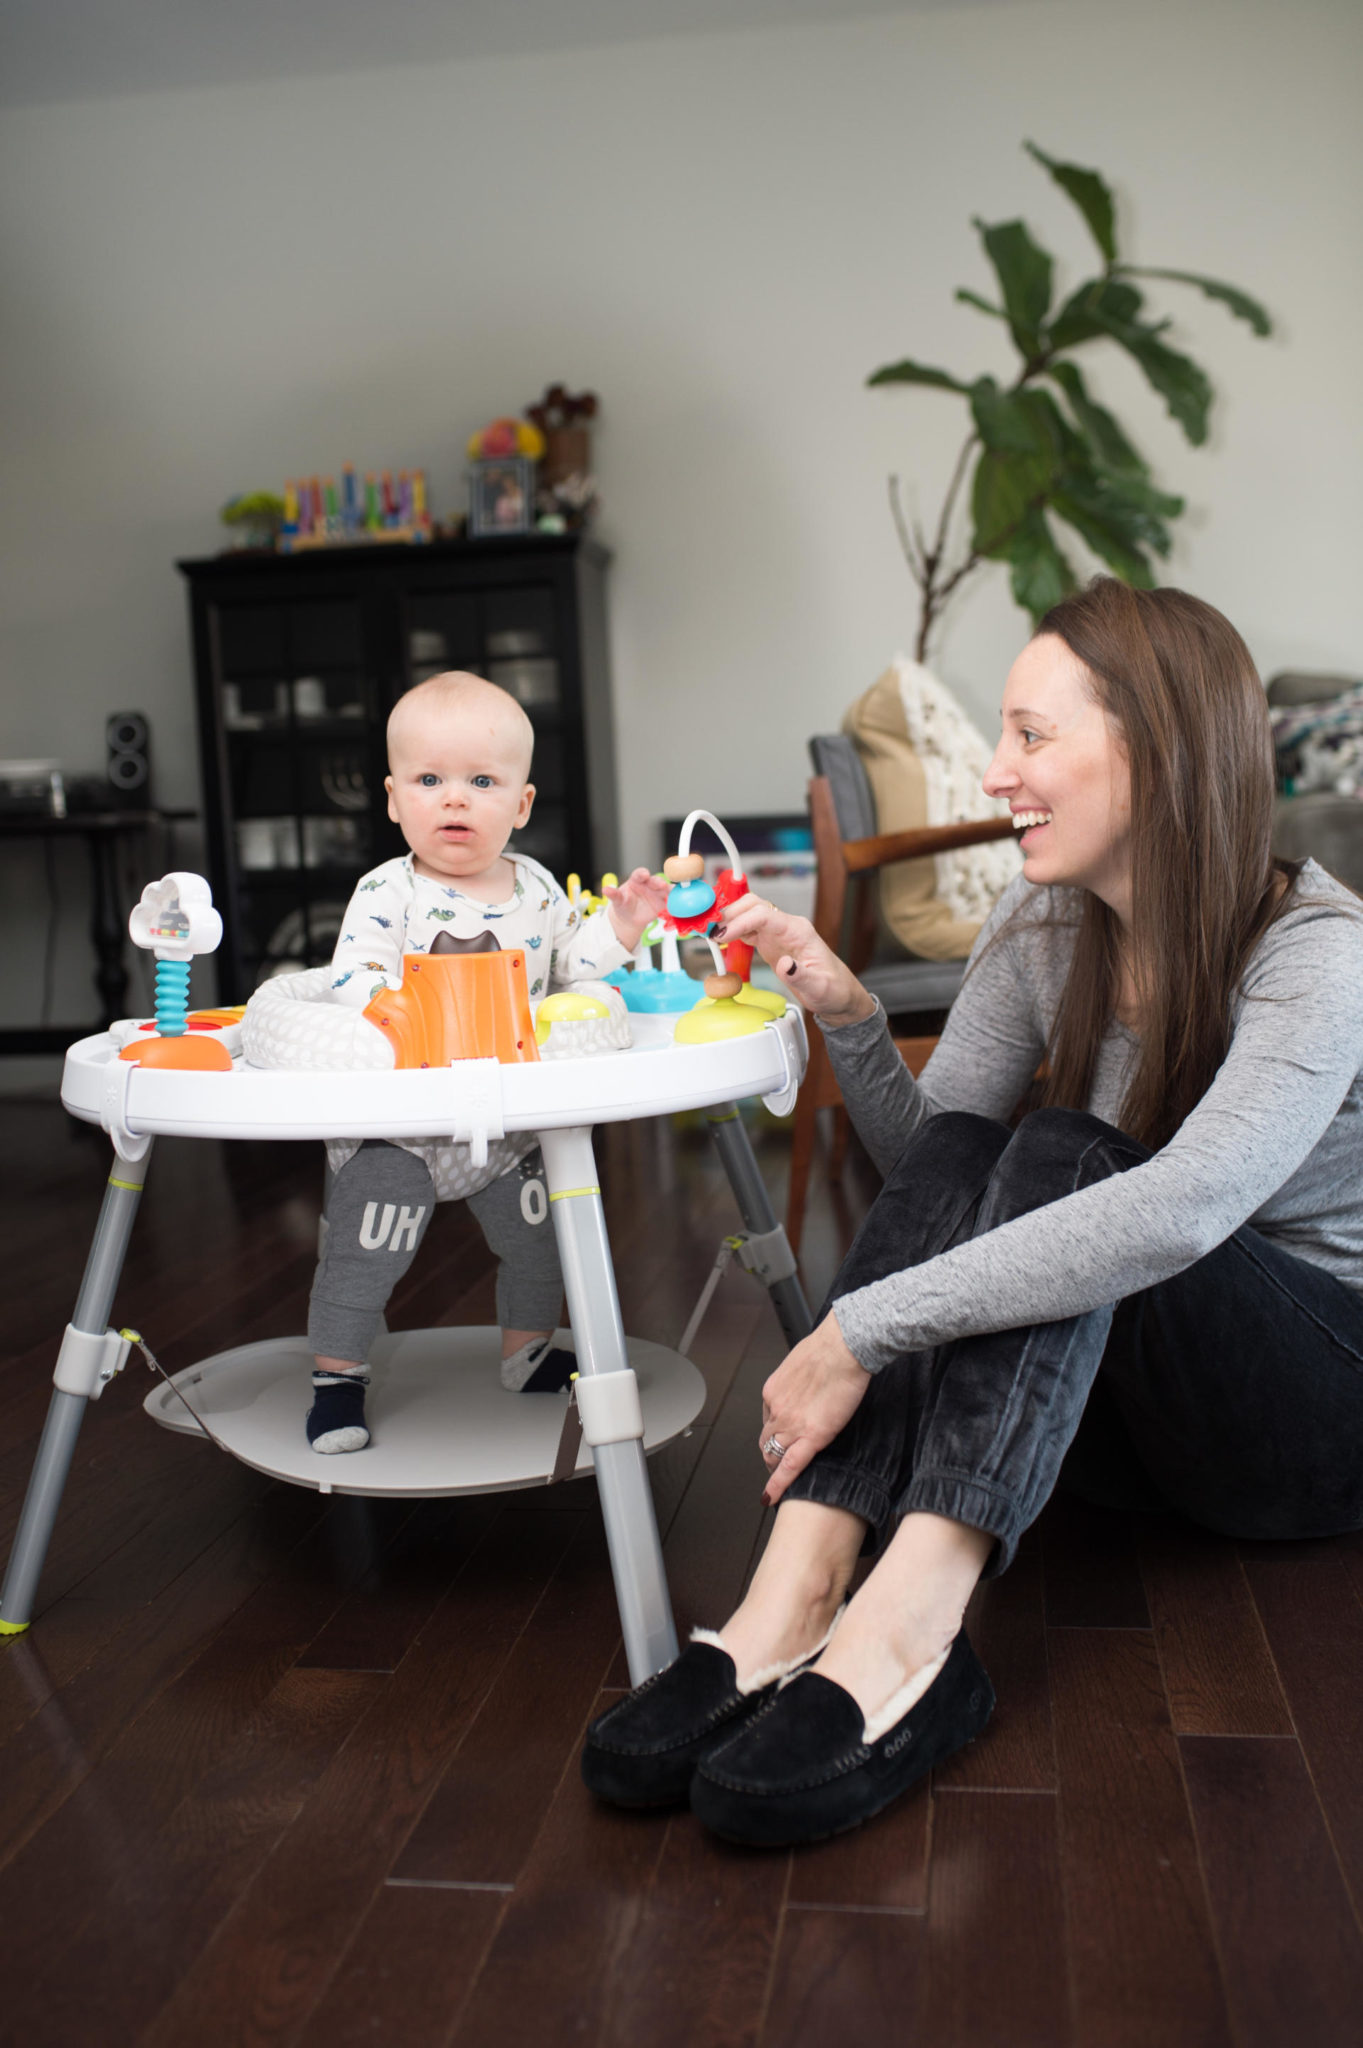 BABY: Sunday Mornings with Skip Hop Activity Center by popular New Jersey lifestyle blogger What's For Dinner Esq.